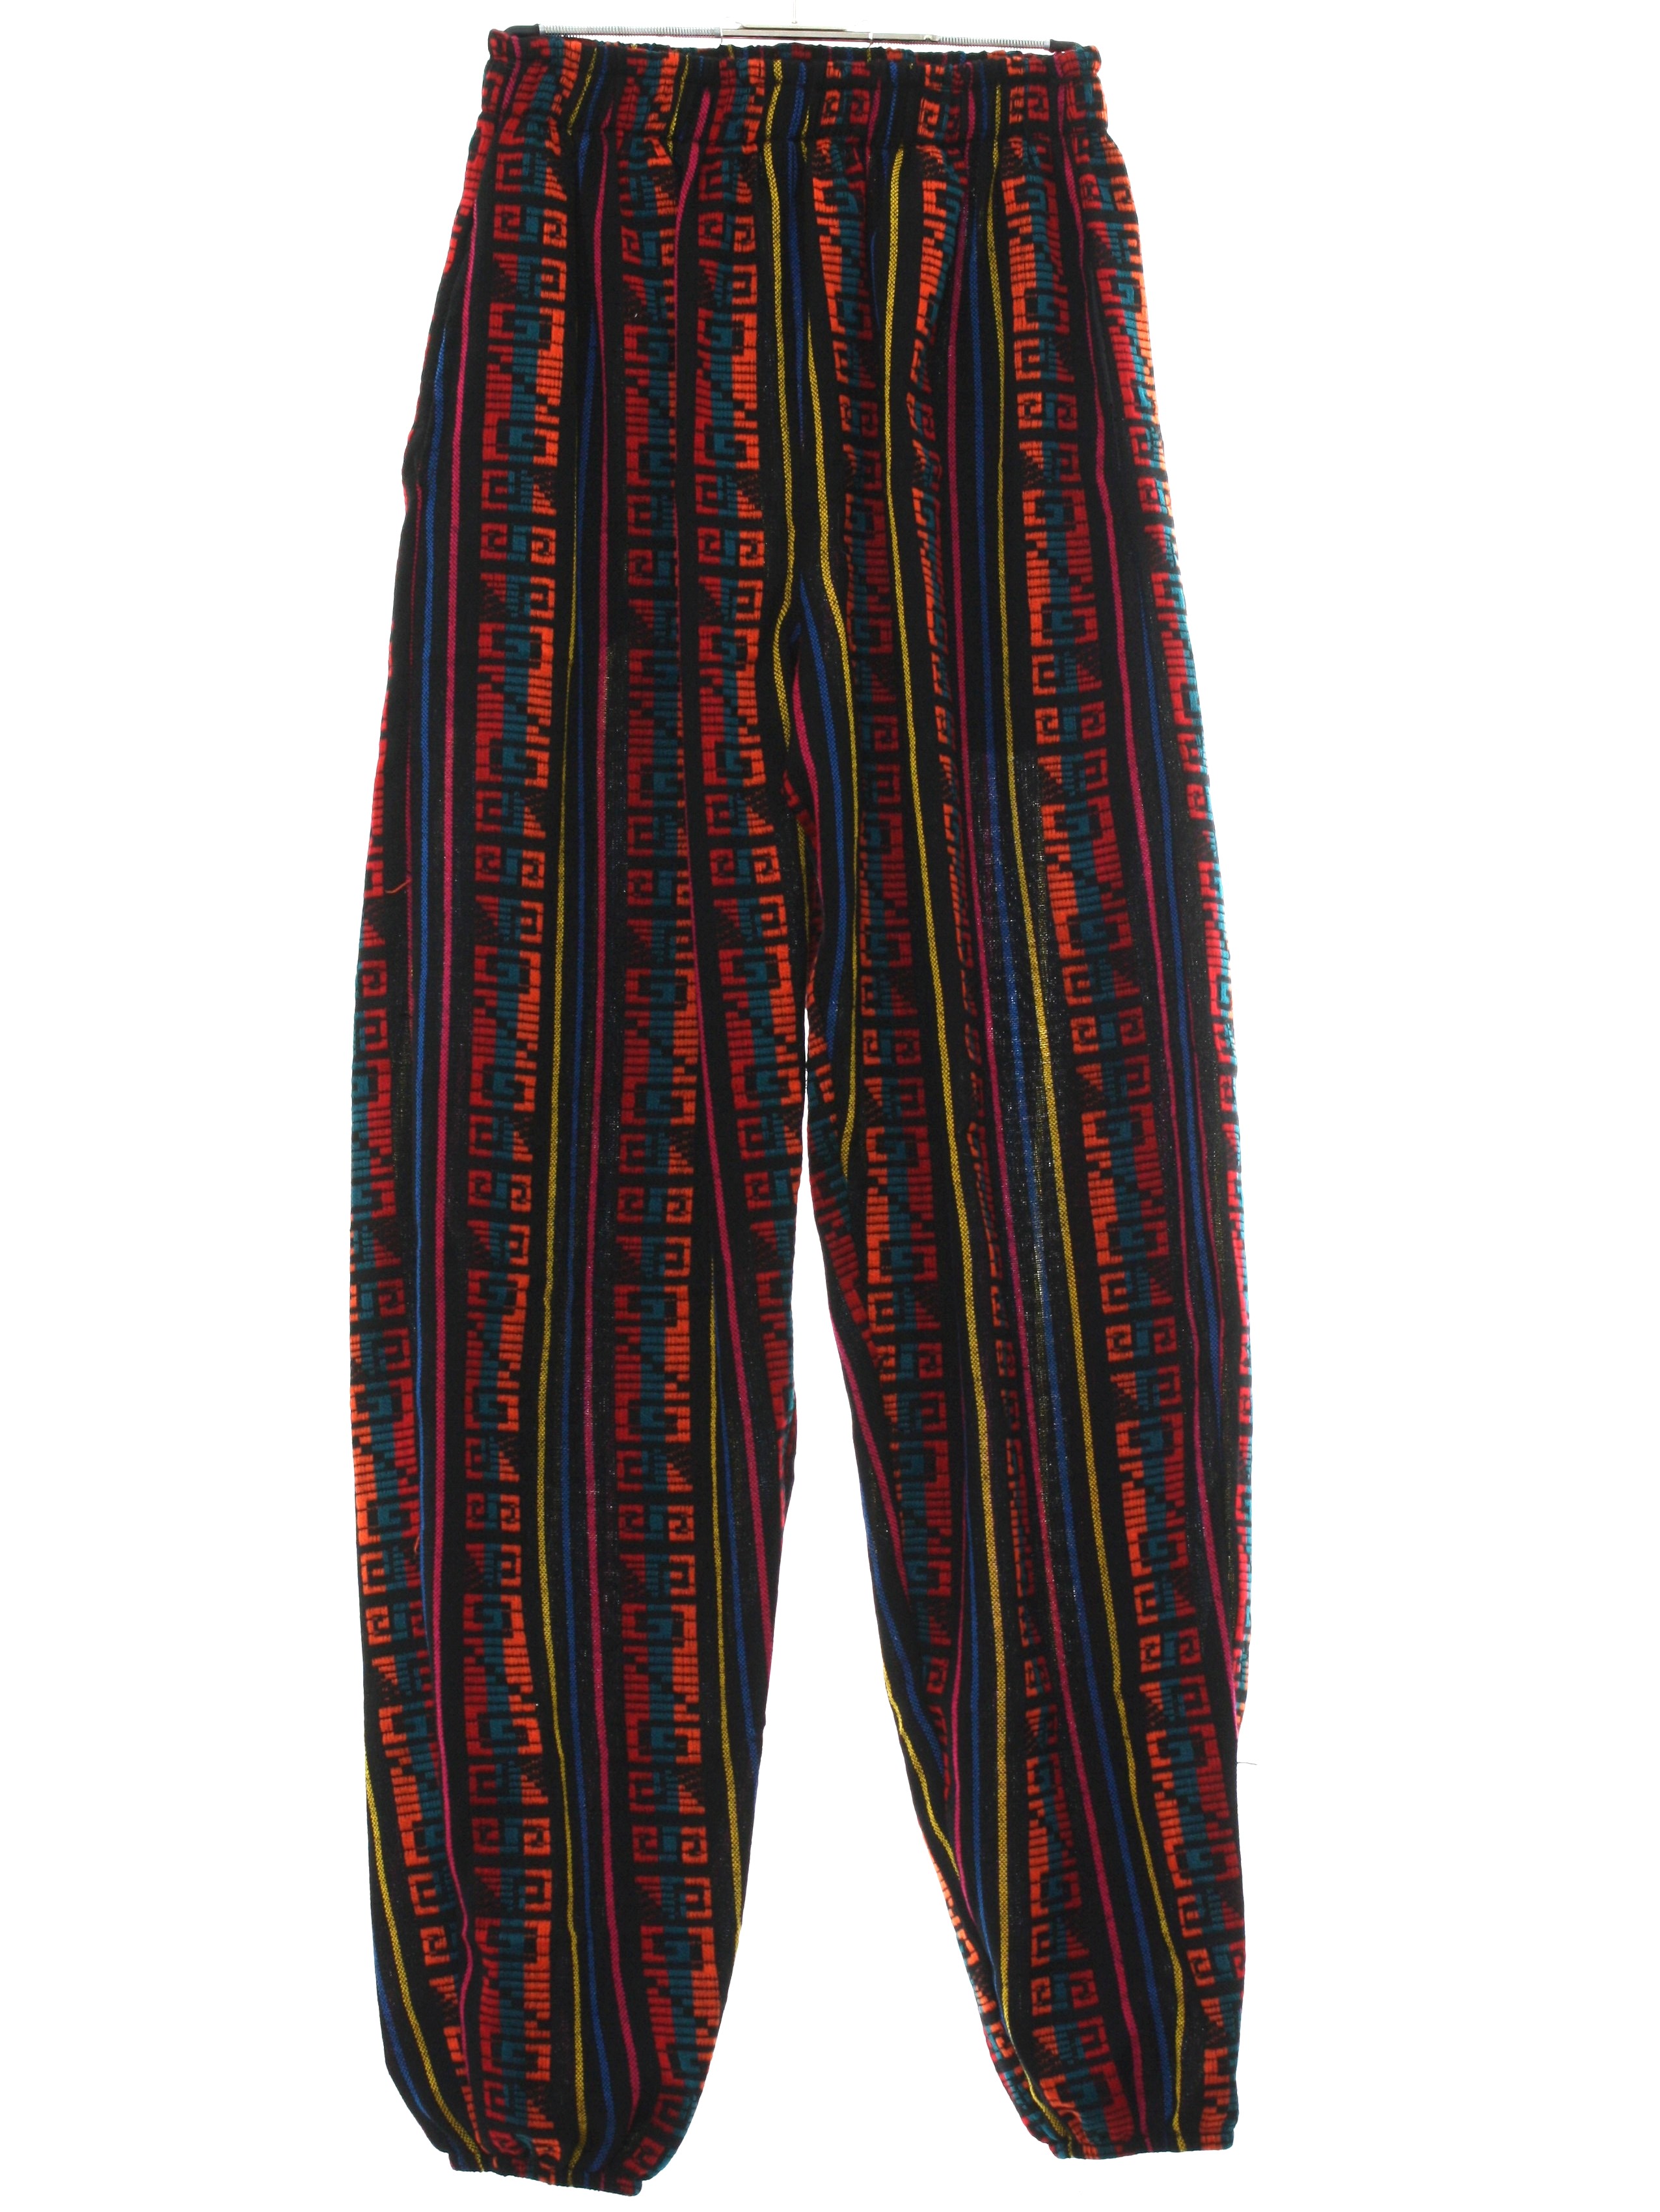 Retro Eighties Pants: 80s Style (made recently) -Home Sewn- Mens black ...